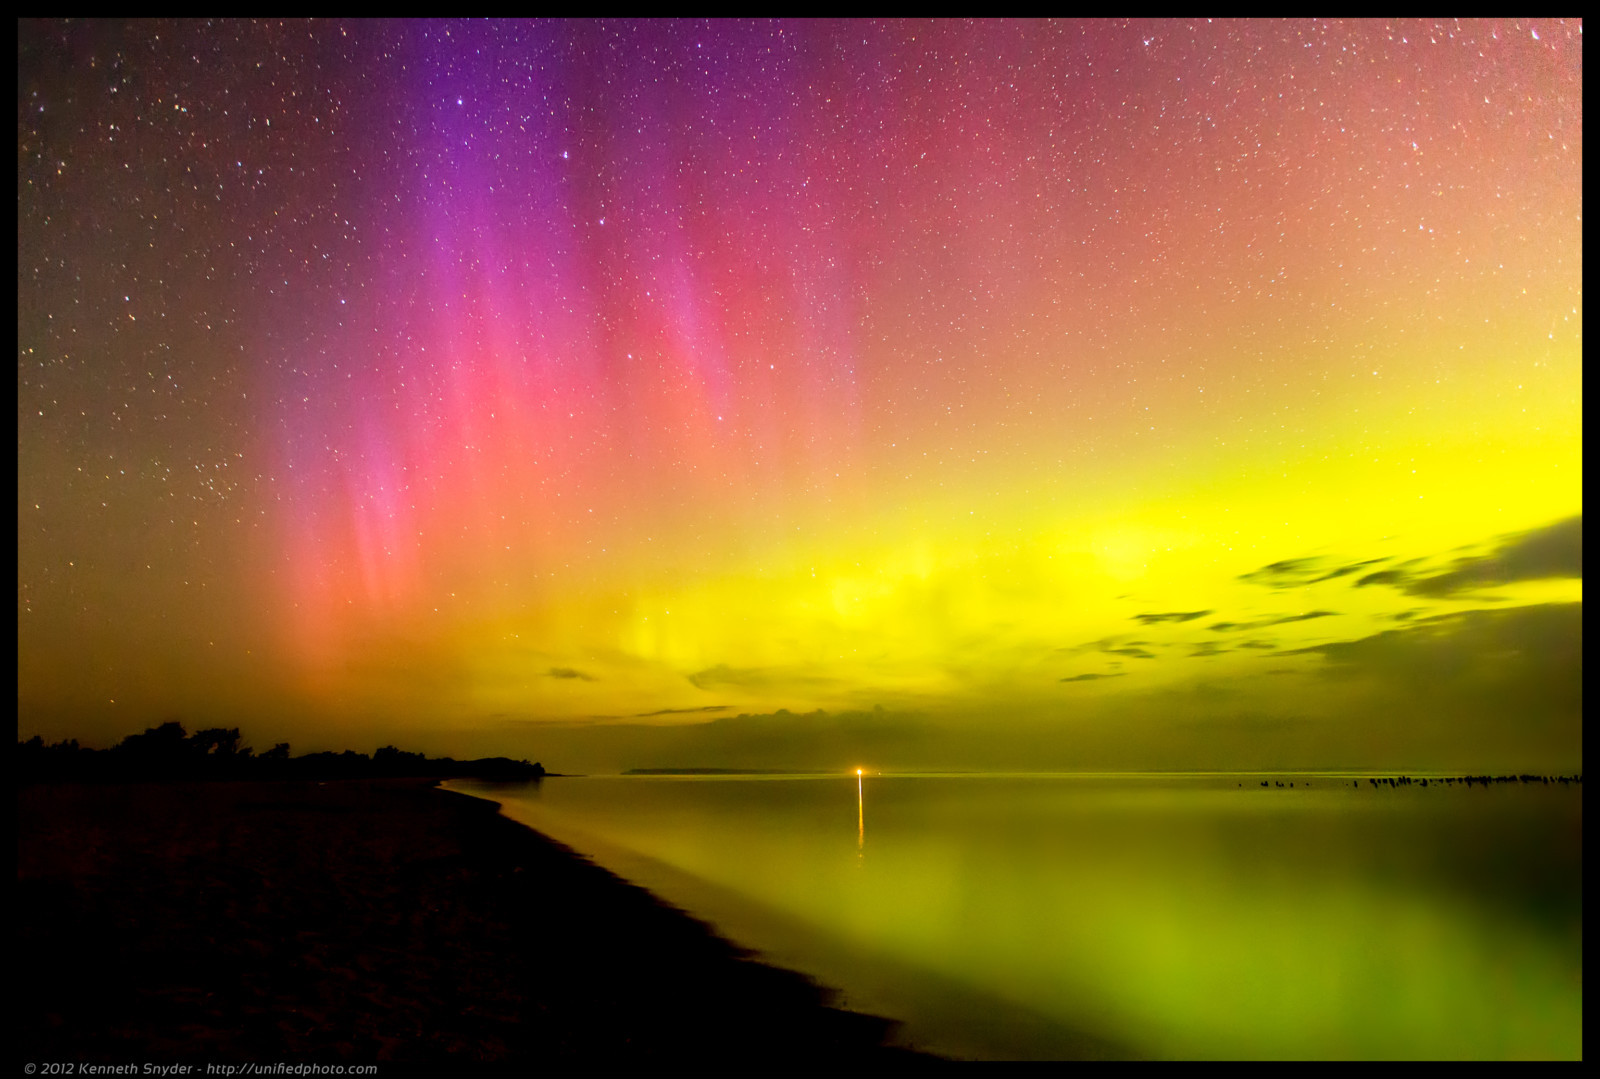 Newly discovered 'dunes' aurora is among the weirdest northern lights